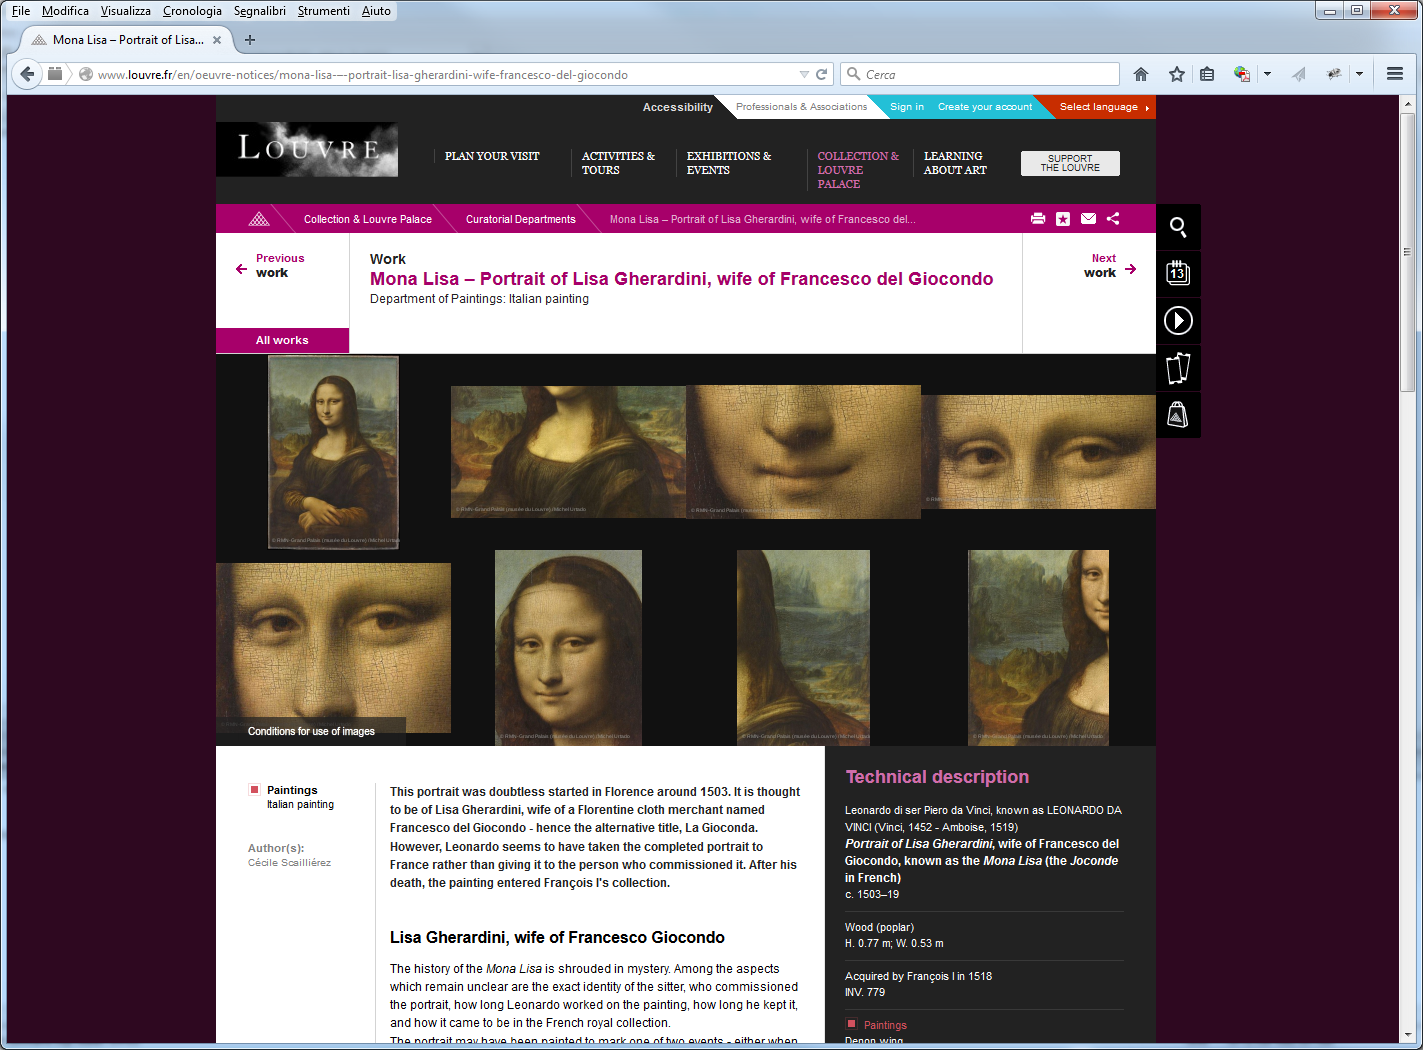 Updated Louvre's web page (at the time of this article) without the statement about the unknown origin of Monna Lisa.